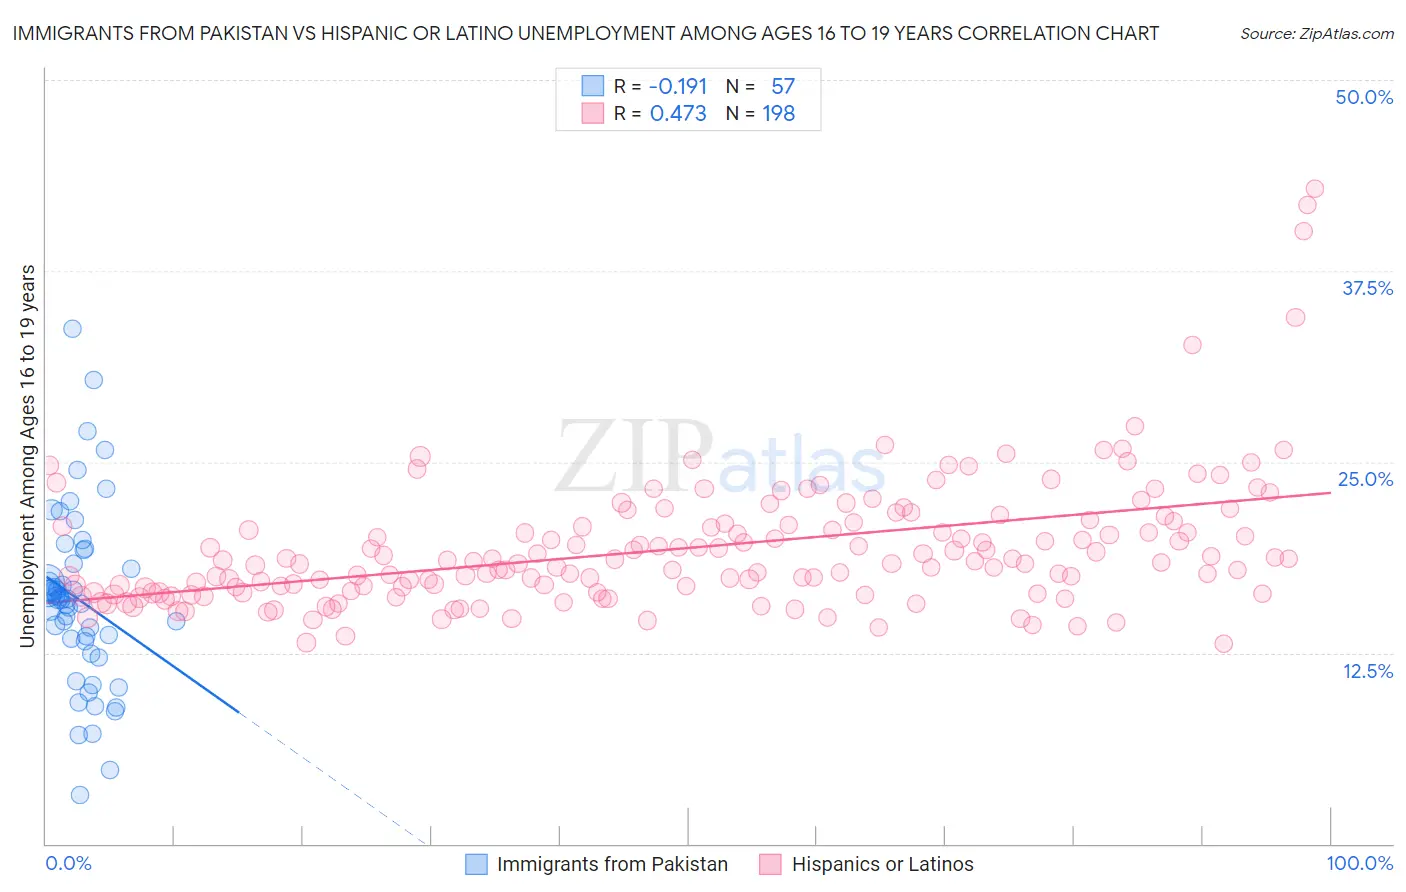 Immigrants from Pakistan vs Hispanic or Latino Unemployment Among Ages 16 to 19 years